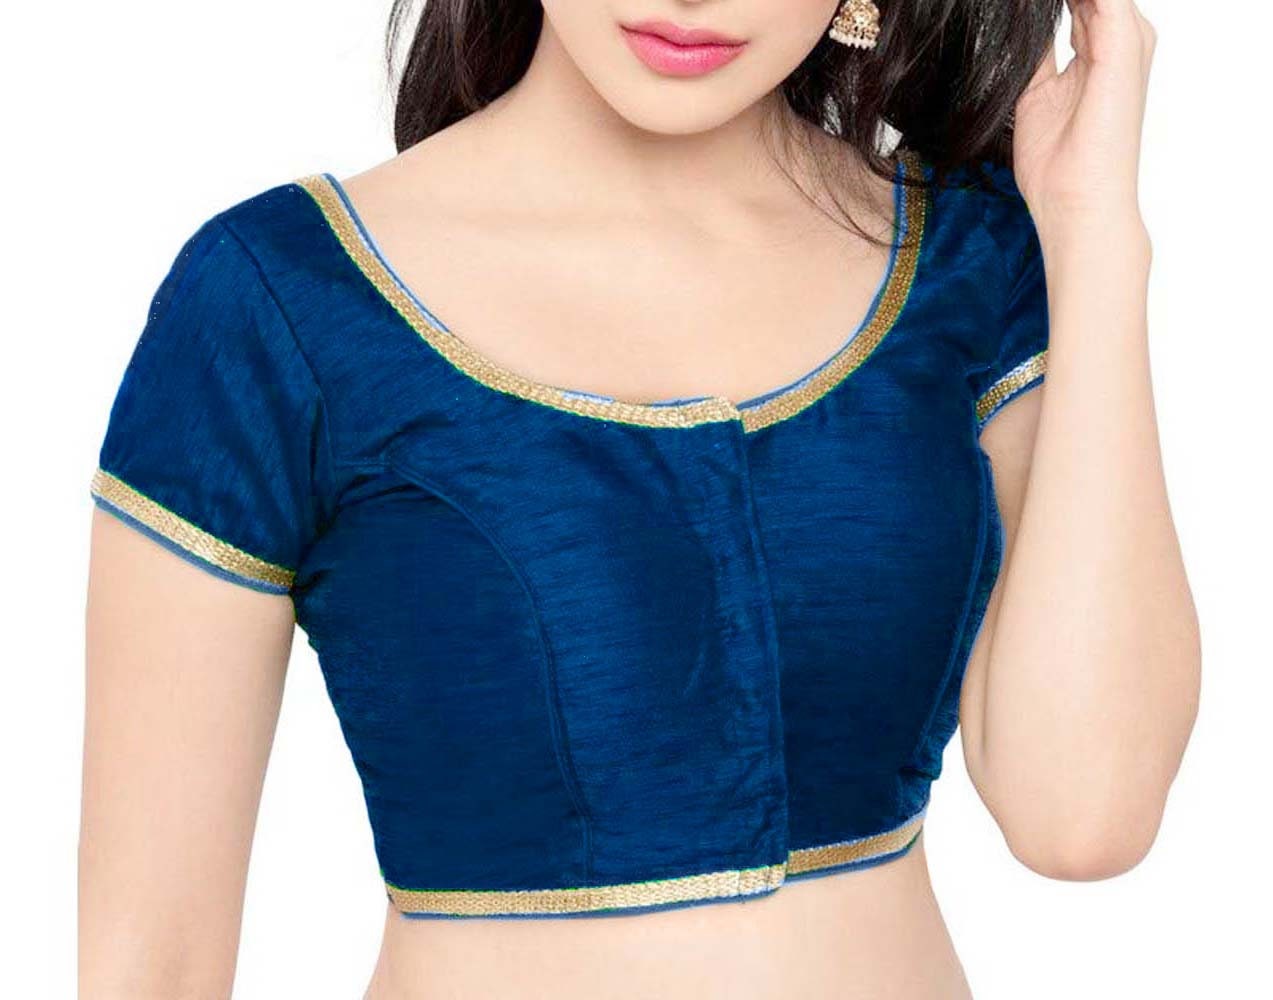 Indian women's Asian Bollywood fashion stitched saree BLOUSE Crop Top Choli 4001 